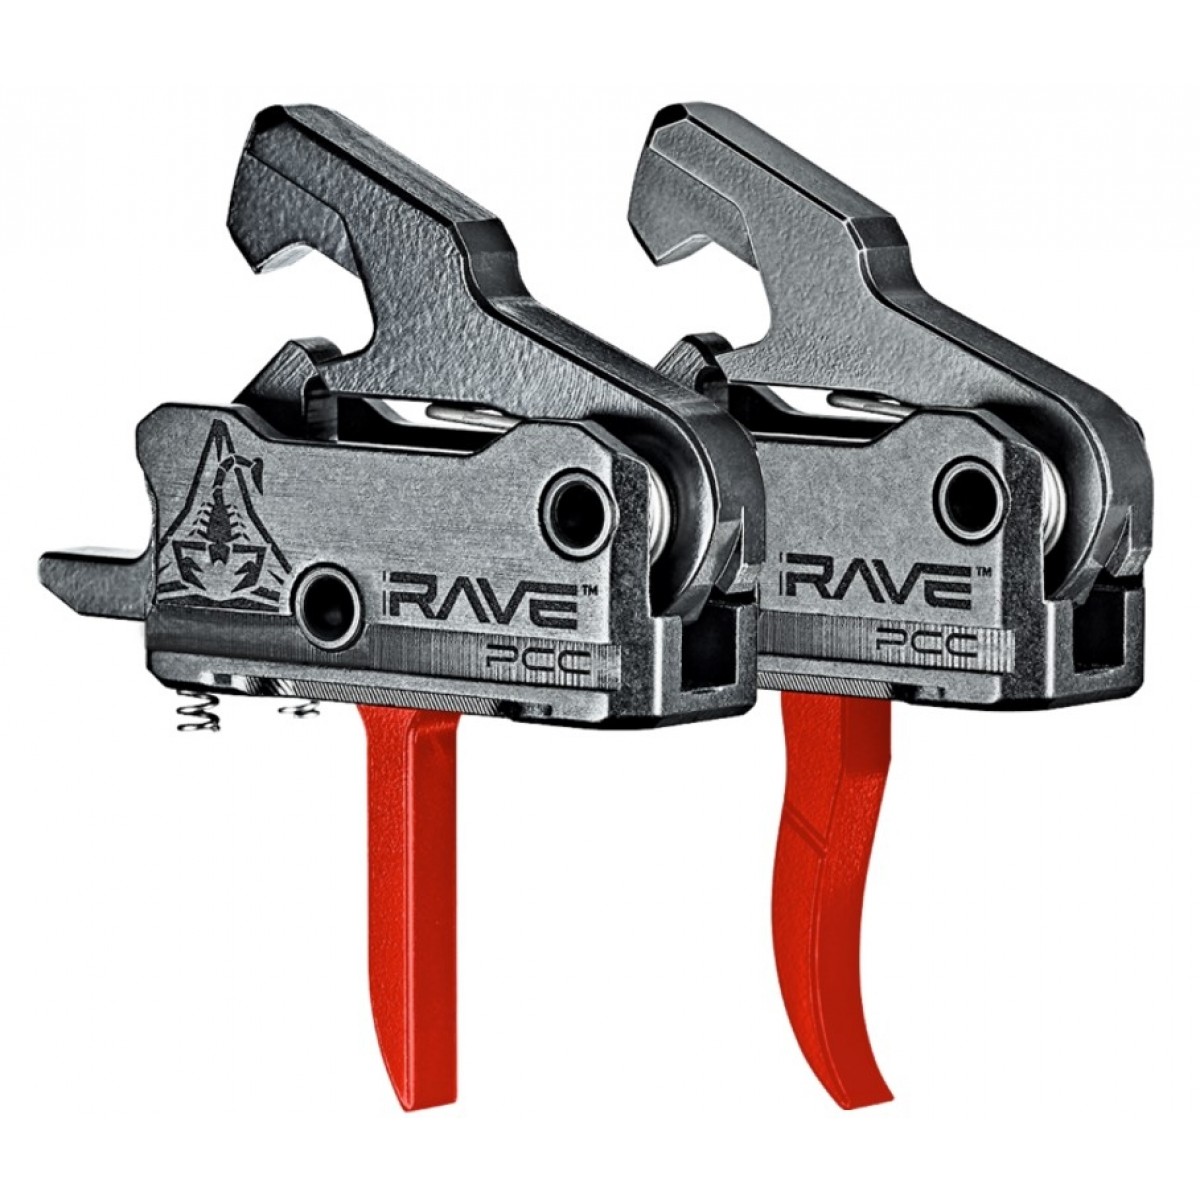 RISE Armament RAVE PCC Super Sporting RISE Red Trigger with Anti-Walk Pins